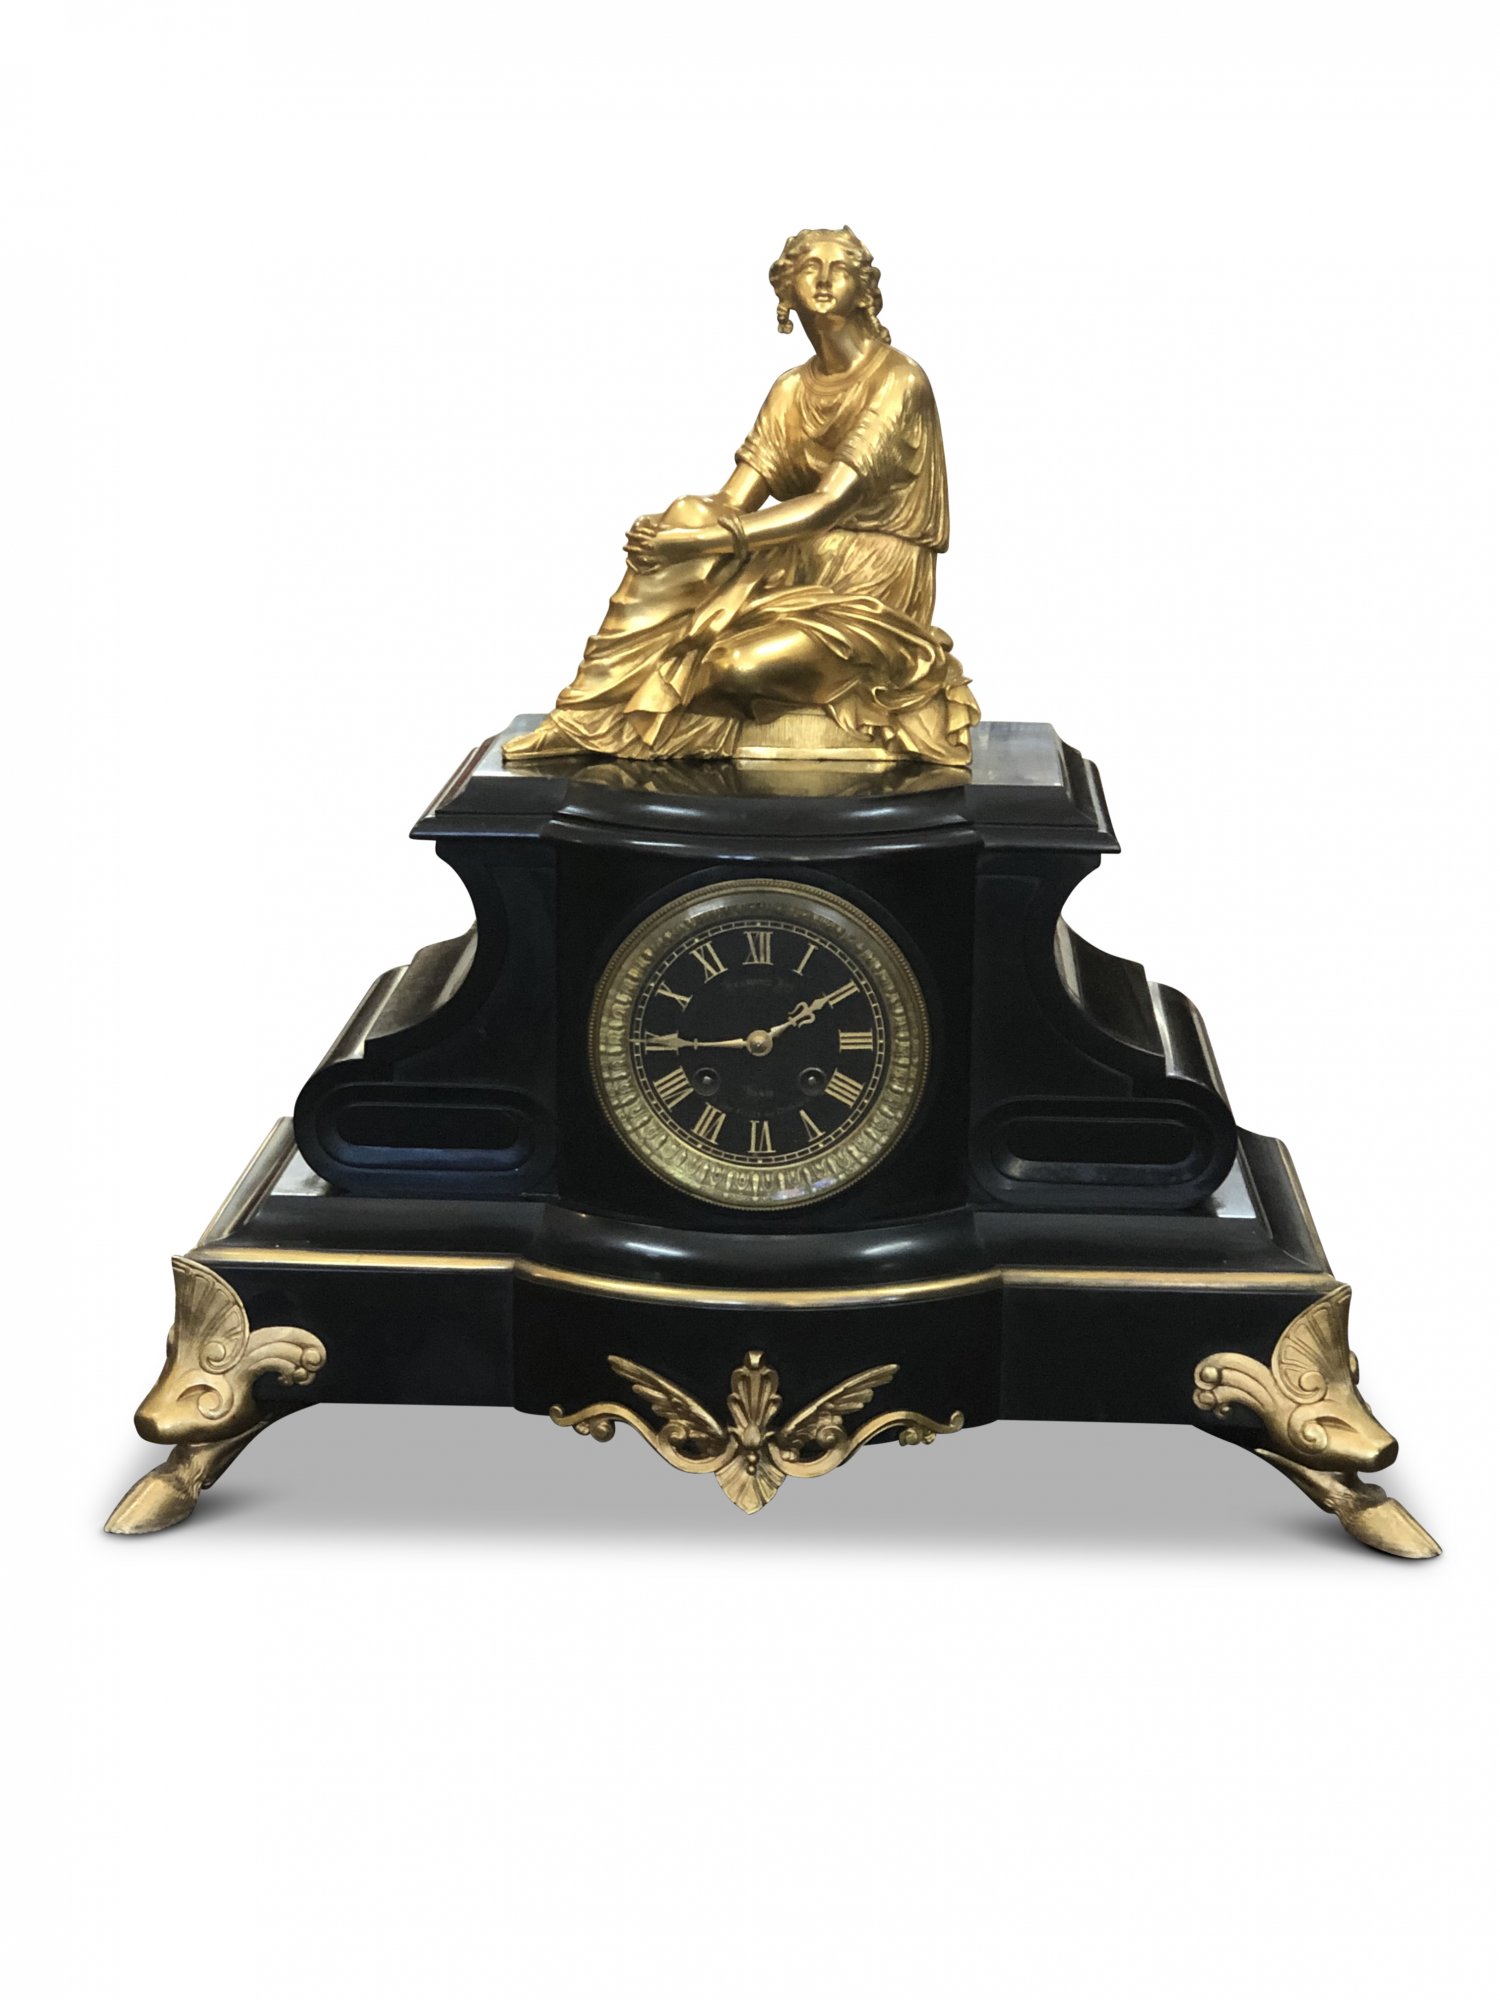 Superb 19th-century French antique bronze and marble clock